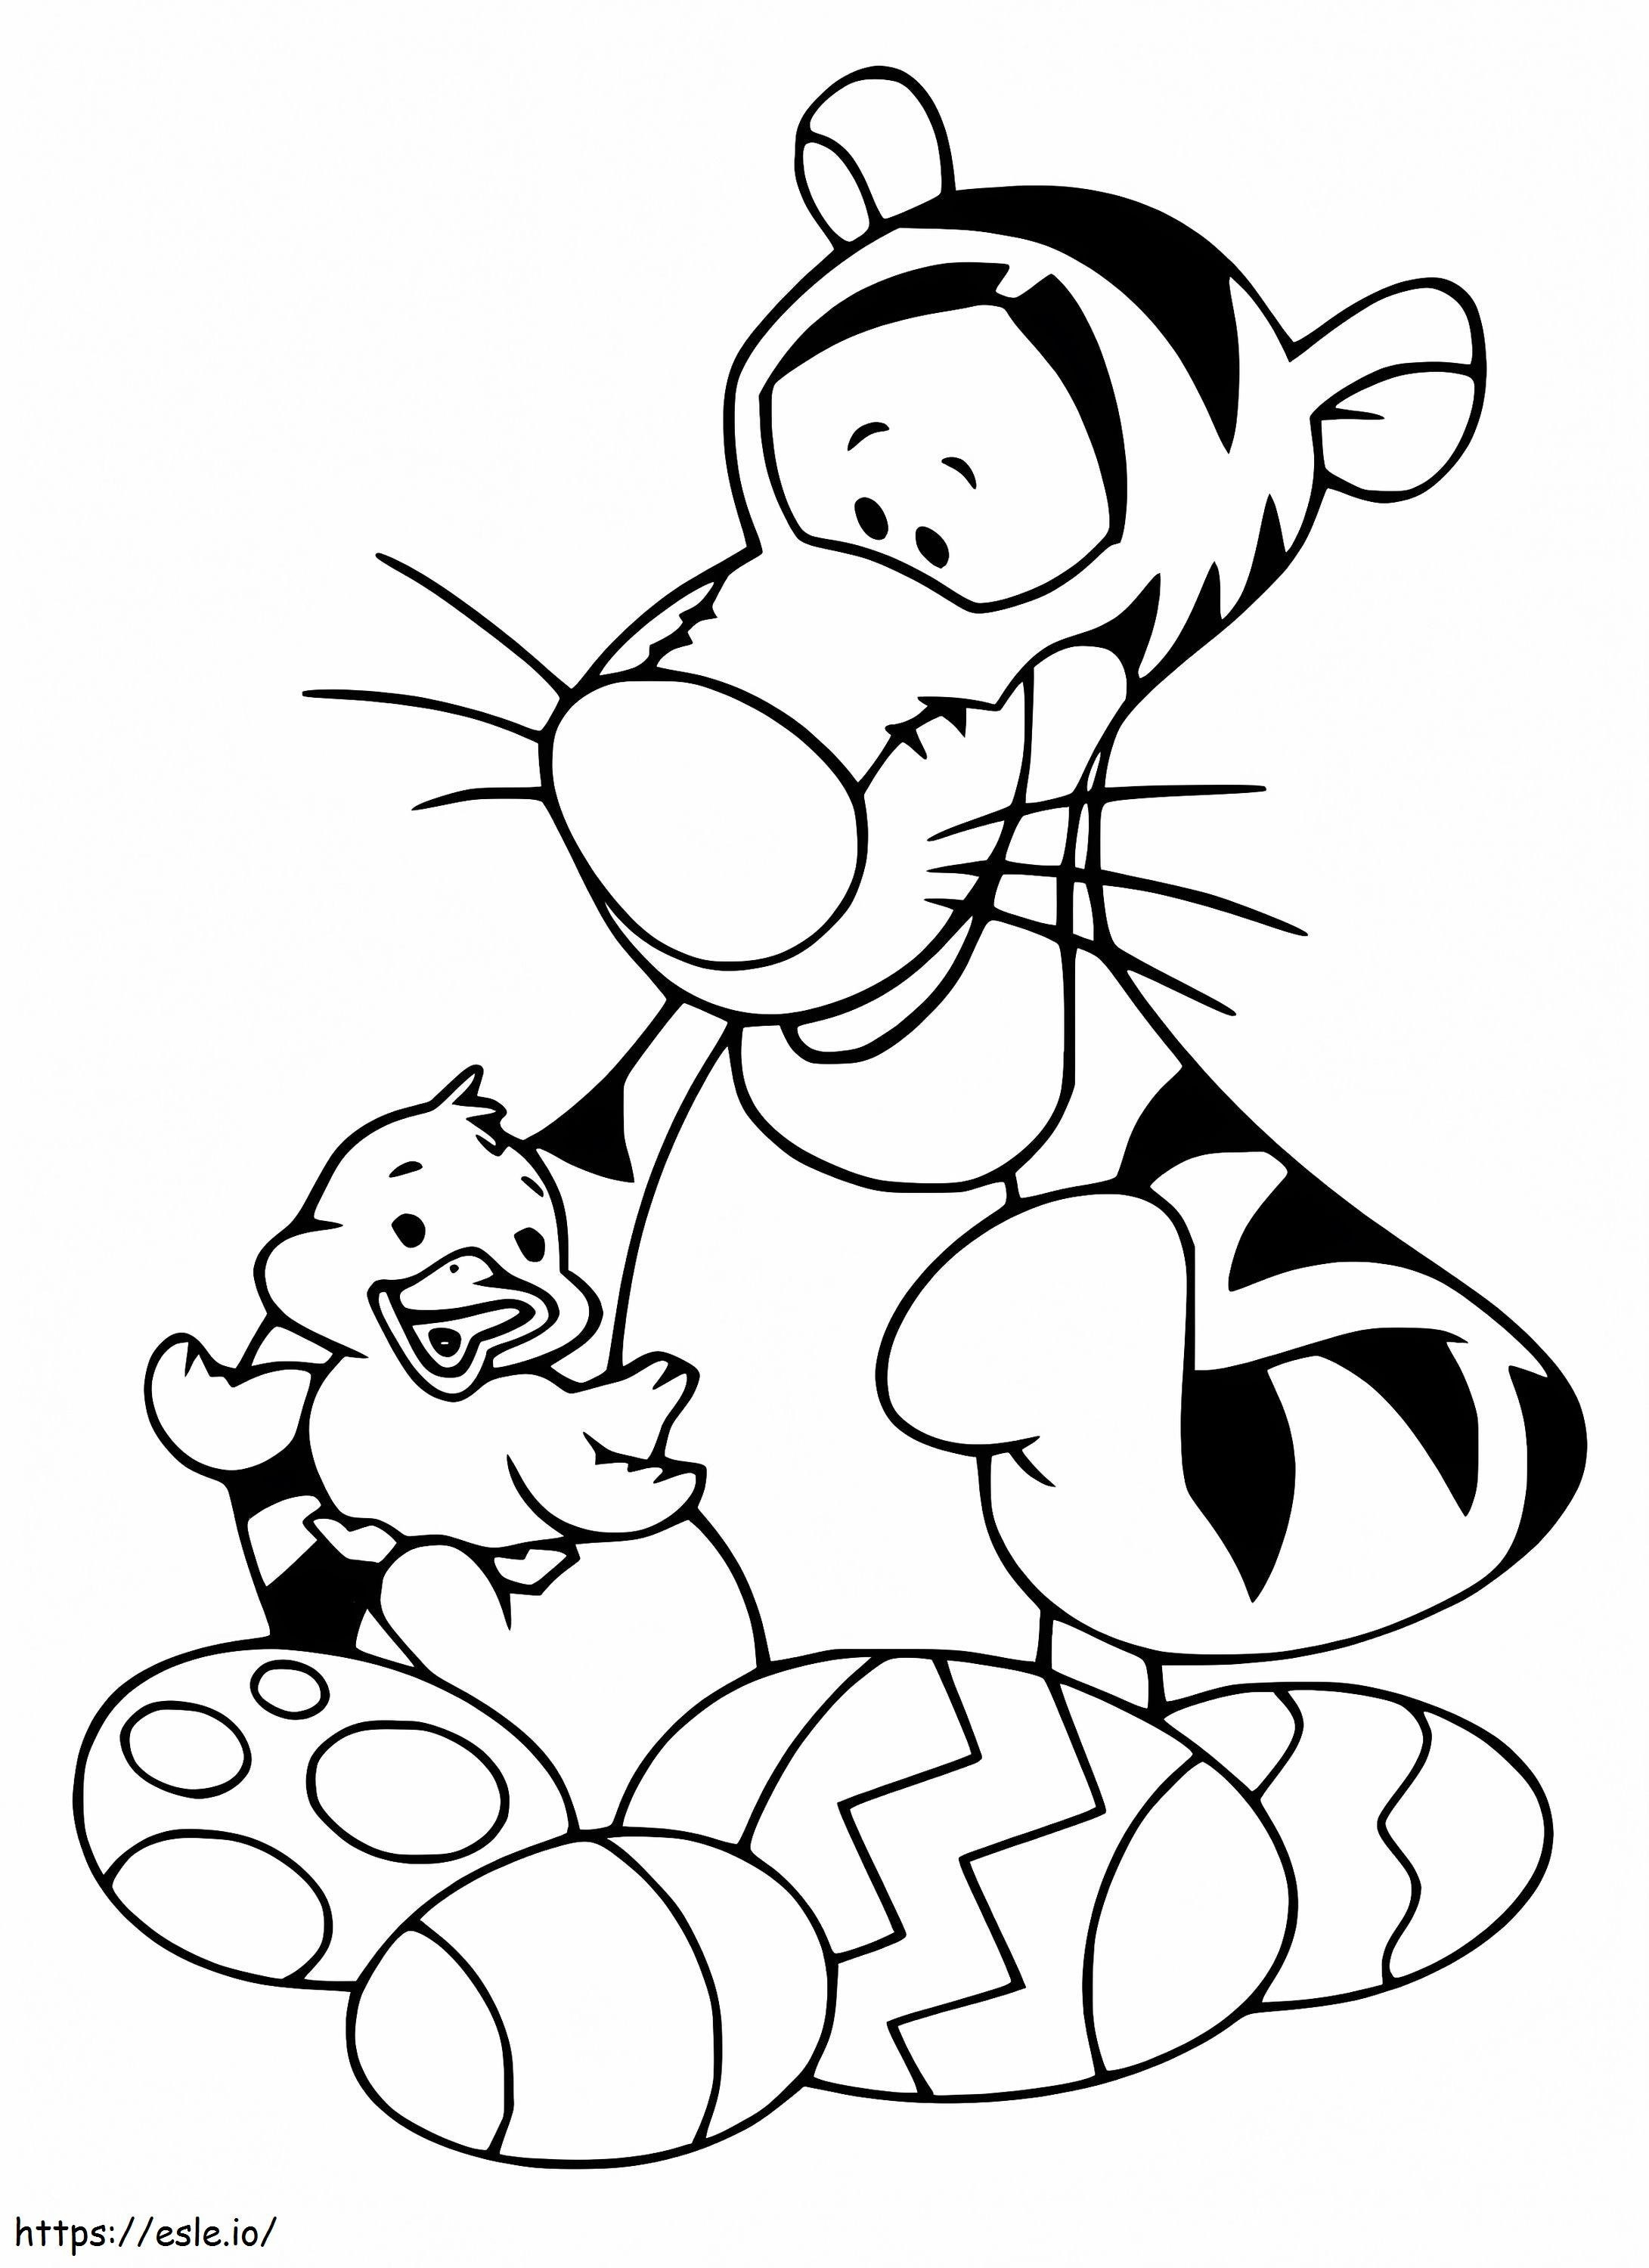 Tigger With Easter Eggs coloring page